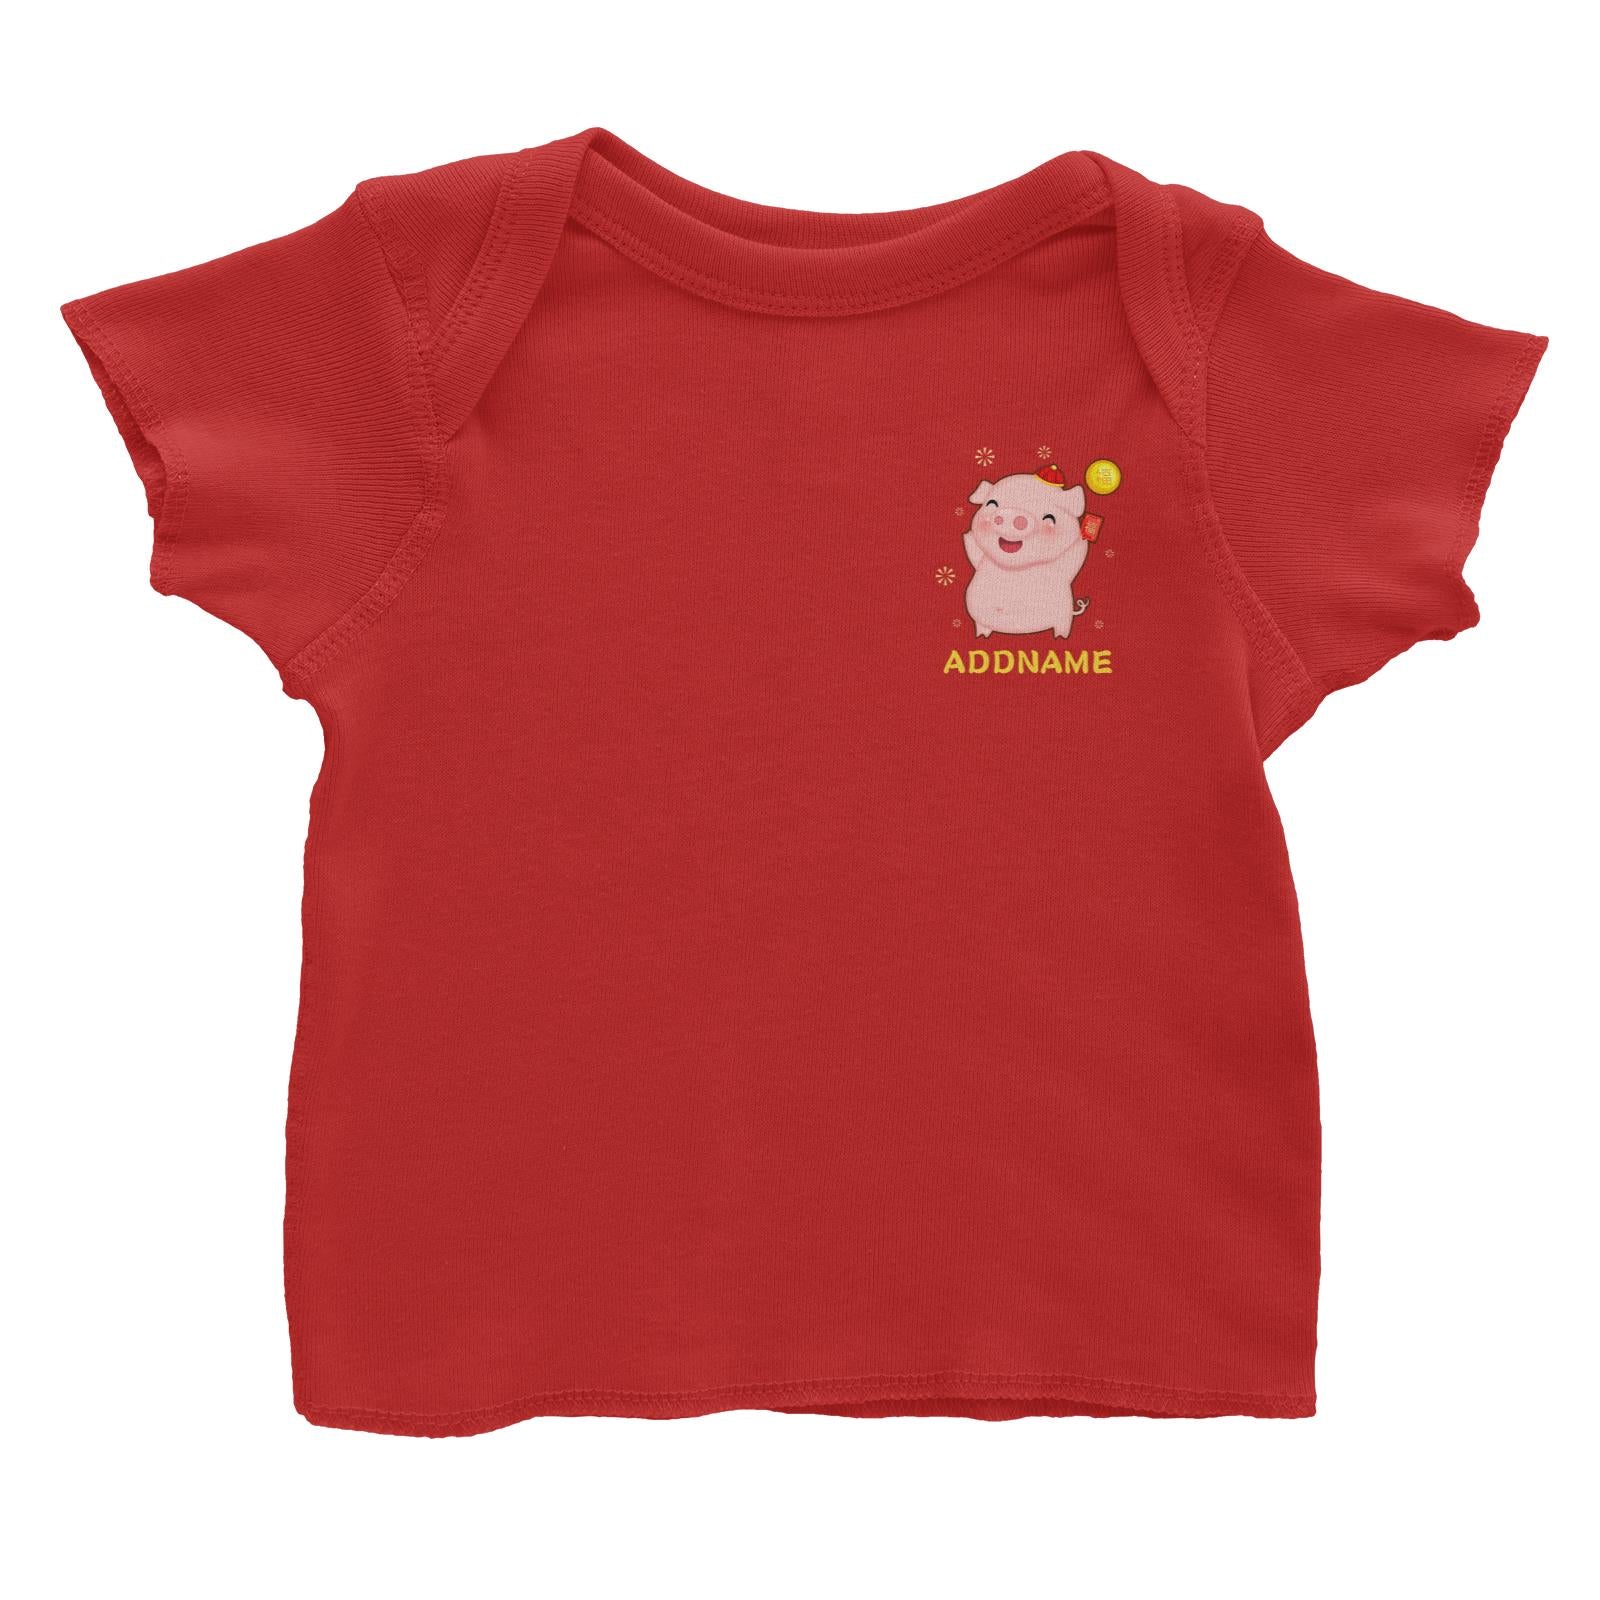 Cute Pig CNY Pig Boy with Red Packet and Happiness Symbol Pocket Design Baby T-Shirt